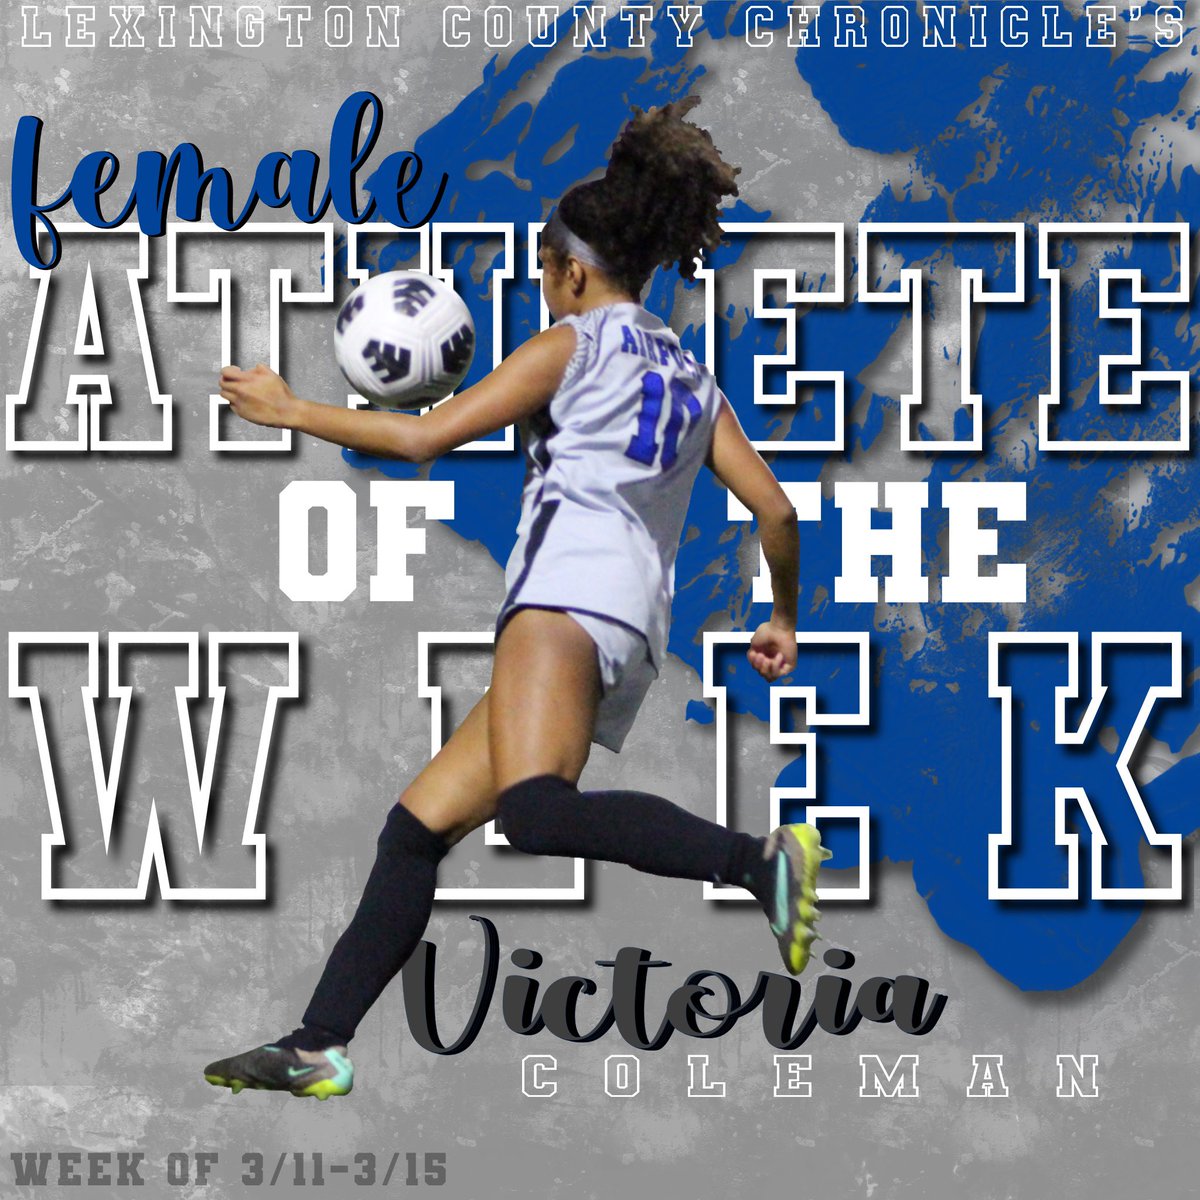 Congratulations to Victoria Coleman for winning Lexington County Chronicle’s Female Athlete of the Week for the week of 3/11-3-15/24 due to her outstanding performances during last weeks games! @LexingtonTwo